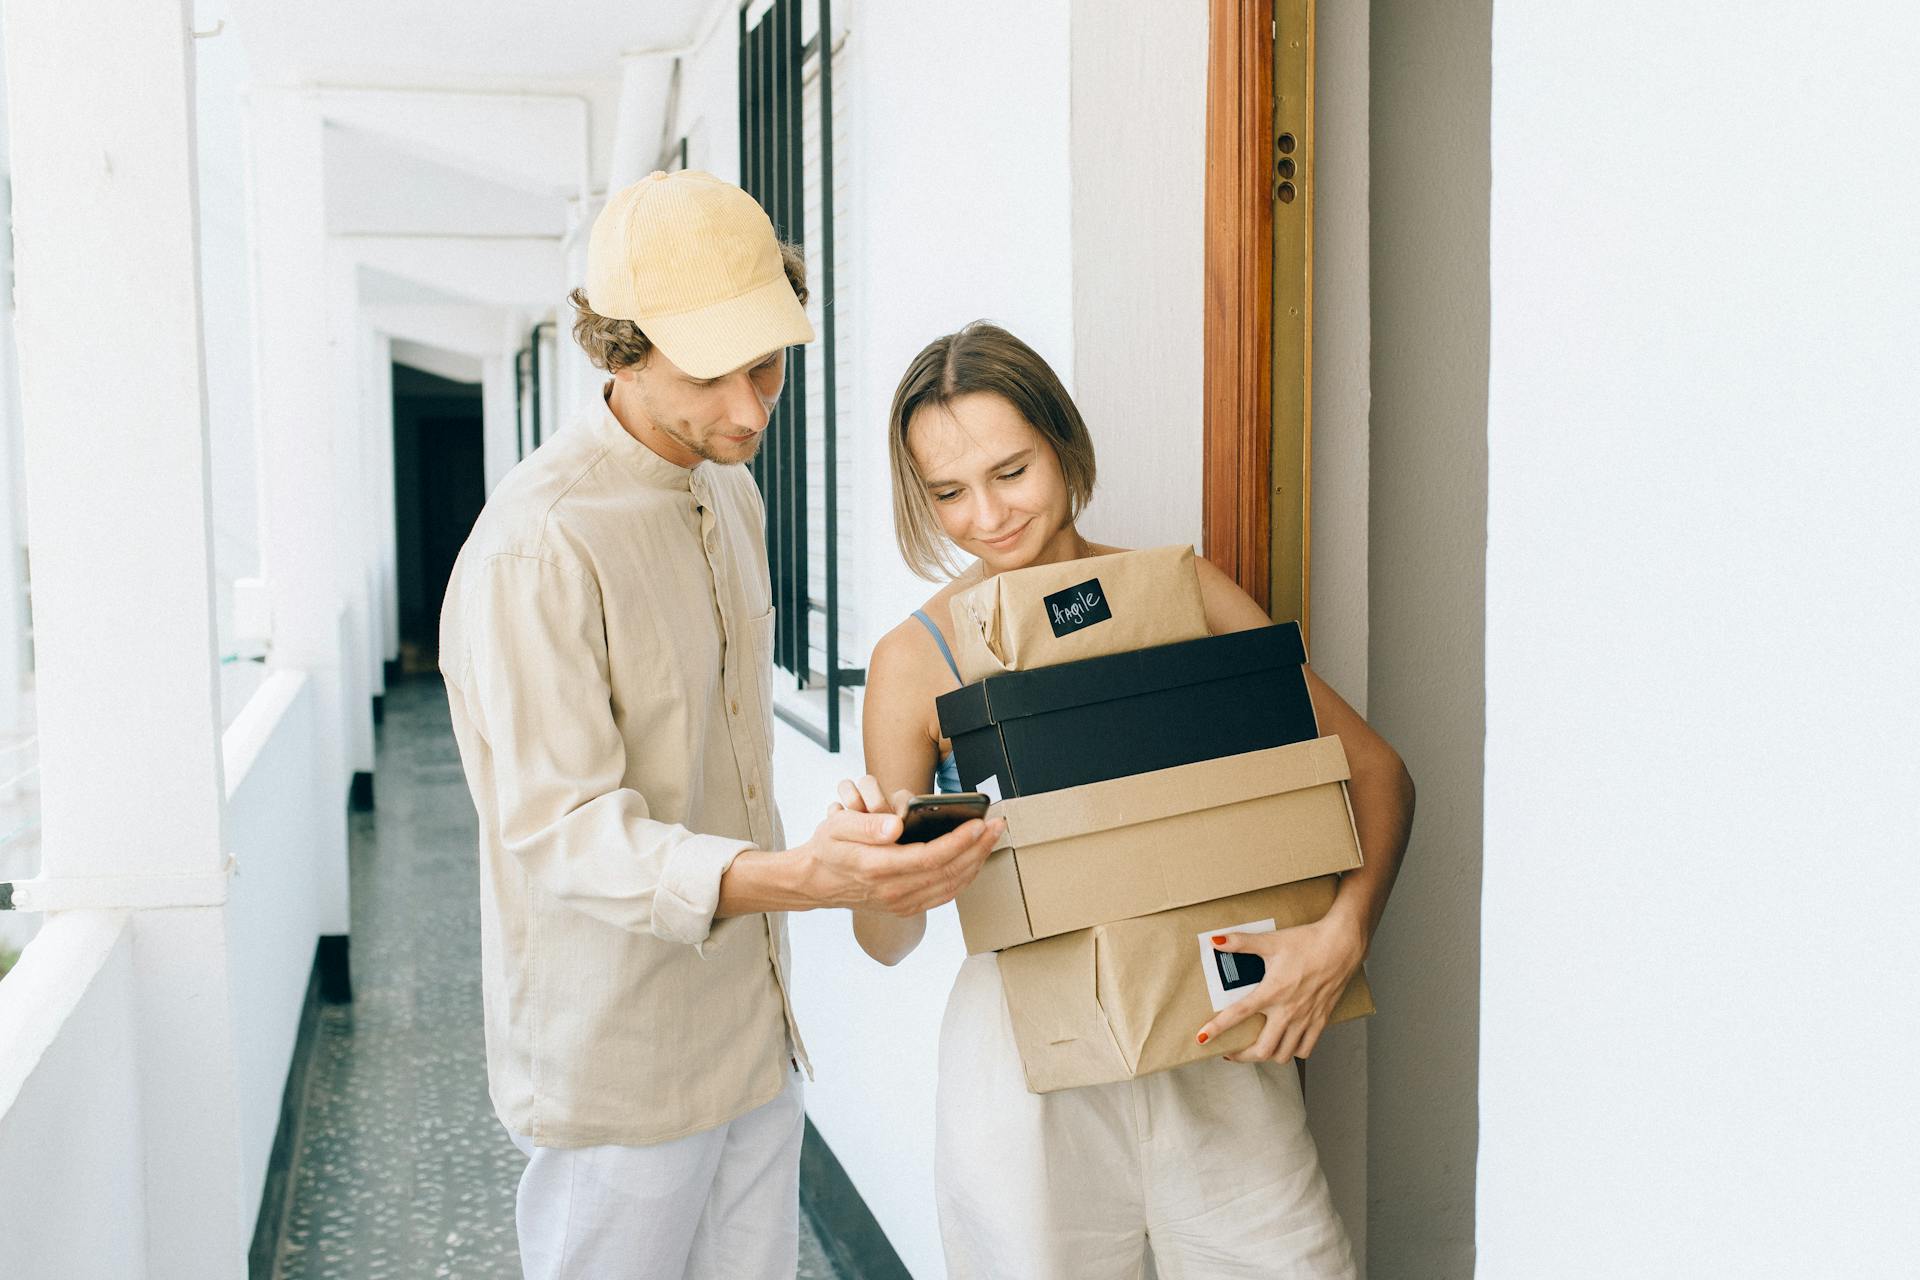 A man and woman holding boxes in a hallway.